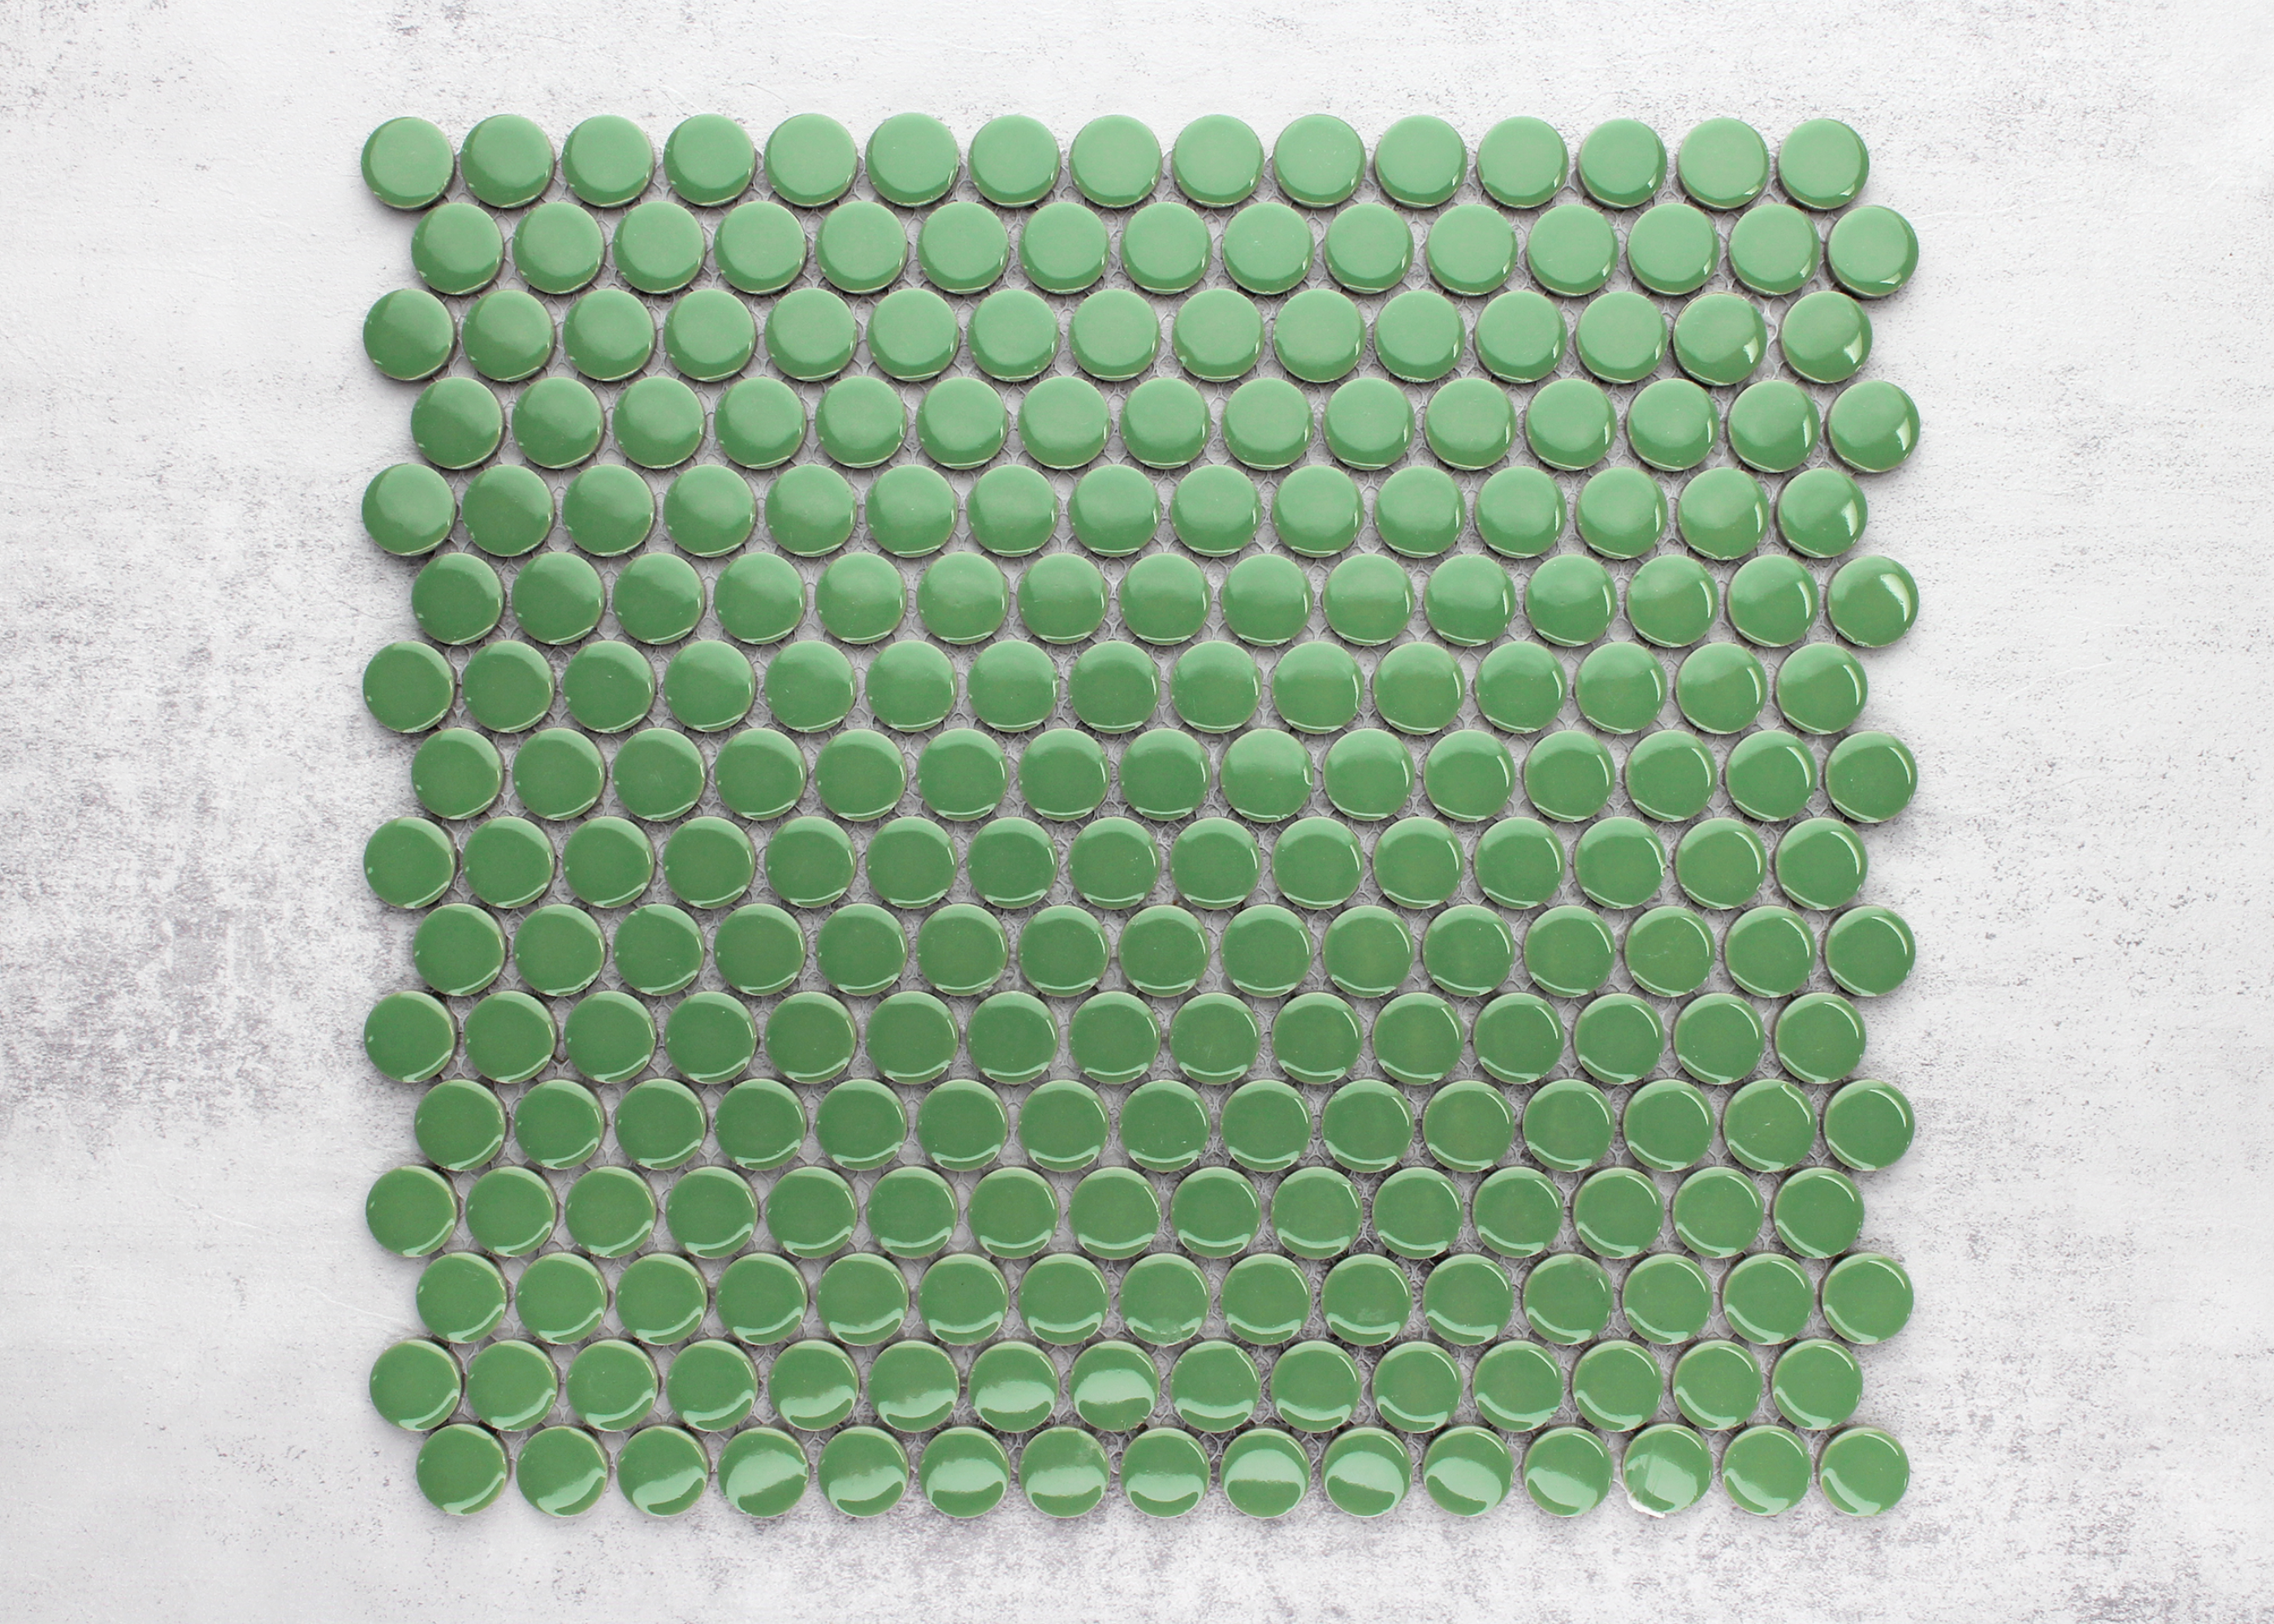 Apple Green Gloss Penny Round-PENNY ROUND-Mosaic Mode